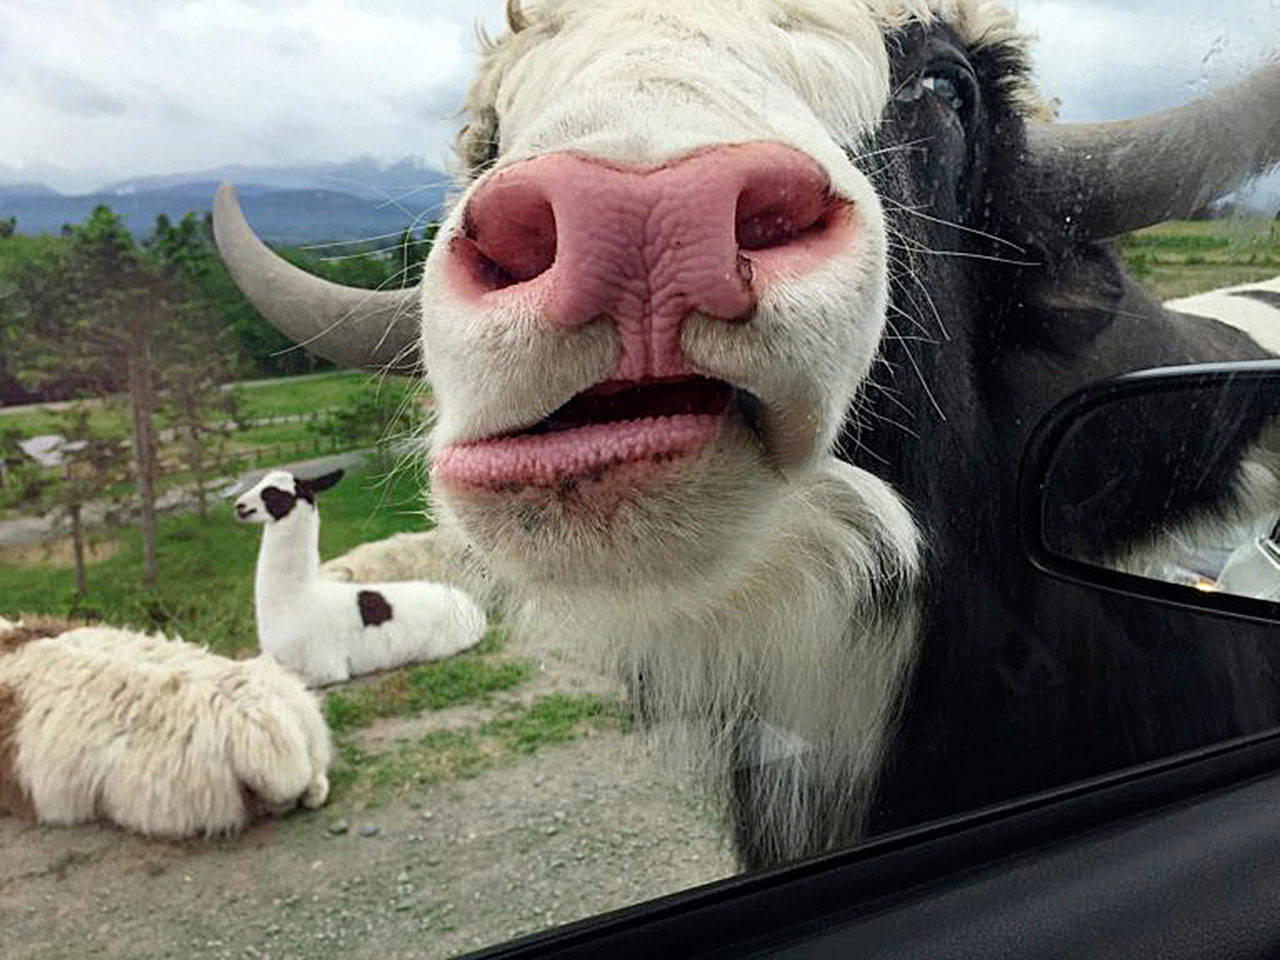 Miriam Grebe of Salinas, Calif., snapped this photo in Sequim that was selected for Reader’s Digest’s “17 Best Snapshots from Road Trips Across America,” an annual reader snapshot contest, highlighted in the publication’s July 2019 edition. “My cousin and I drove through a wildlife exhibit where you can feed the animals from your car. This yak must have been really hungry, because he stuck his whole head through the window!” Grebe wrote. See www.rd.com/advice/travel/roadtrip-reader-photos for more top “Road Trips” snapshots. Photo courtesy of Reader’s Digest, Copyright © 2019, reprinted with permission of Trusted Media Brands, Inc., Copyright © 2019